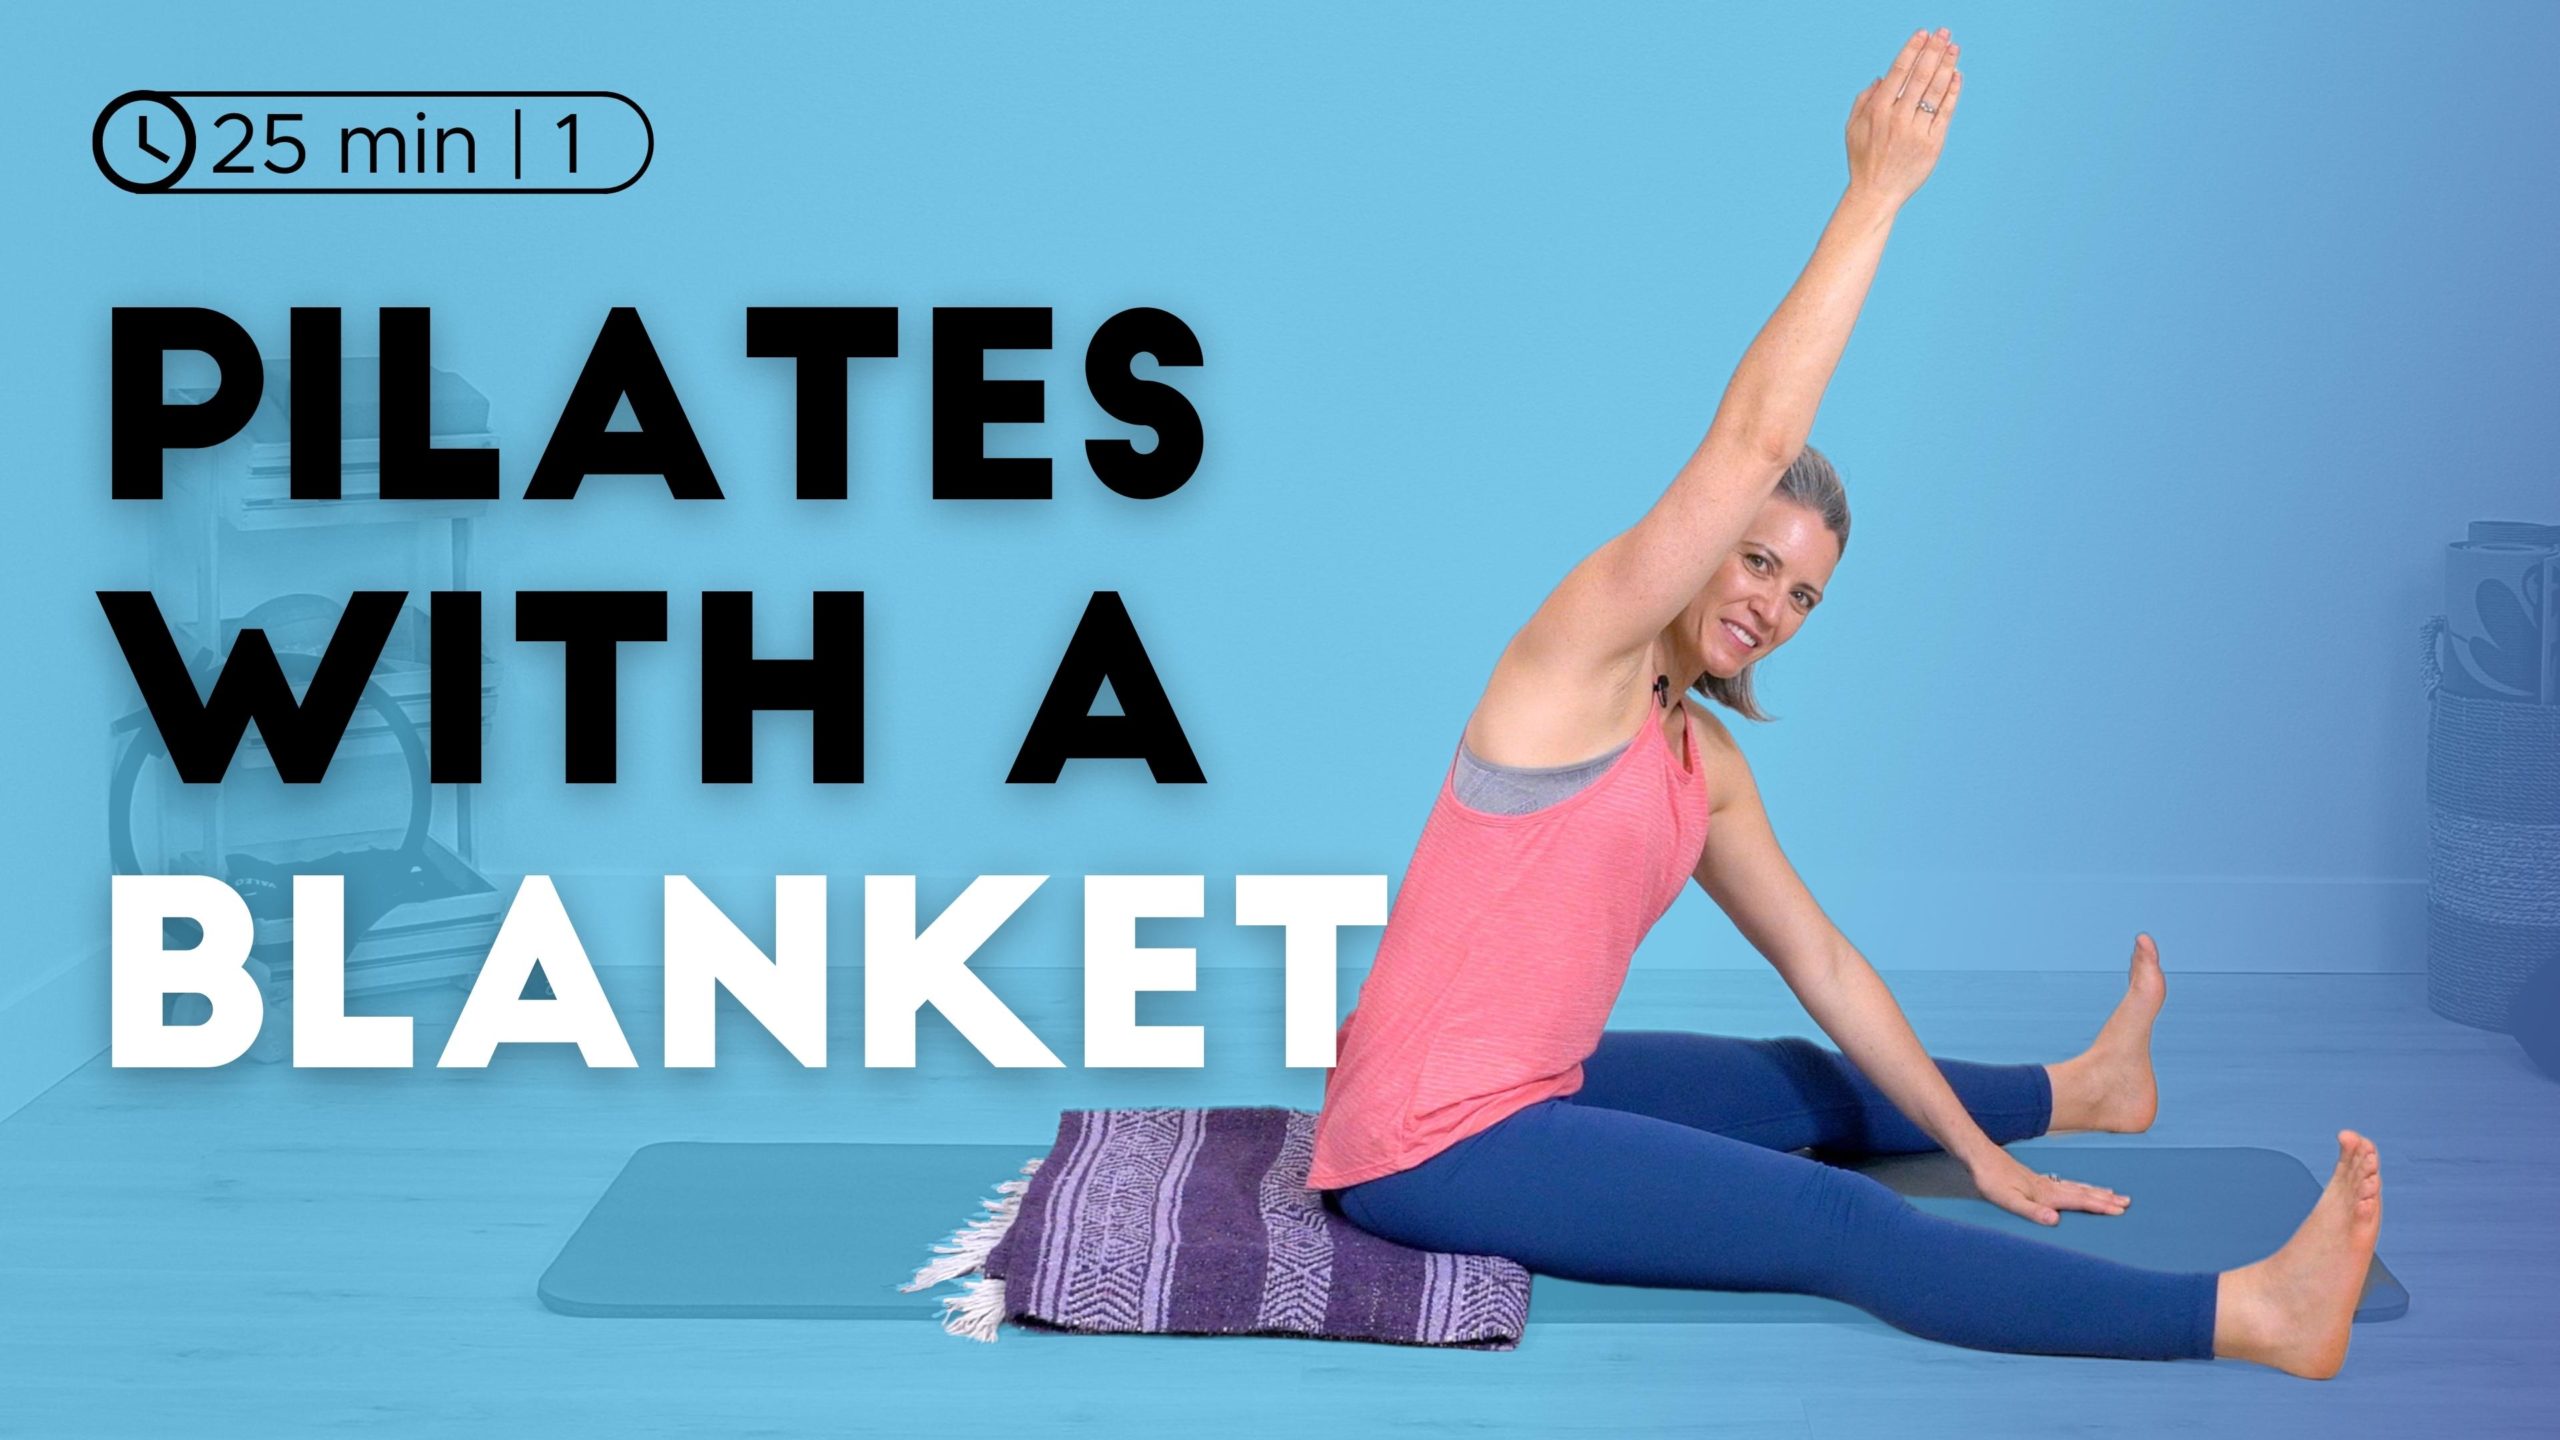 Pilates with a Blanket